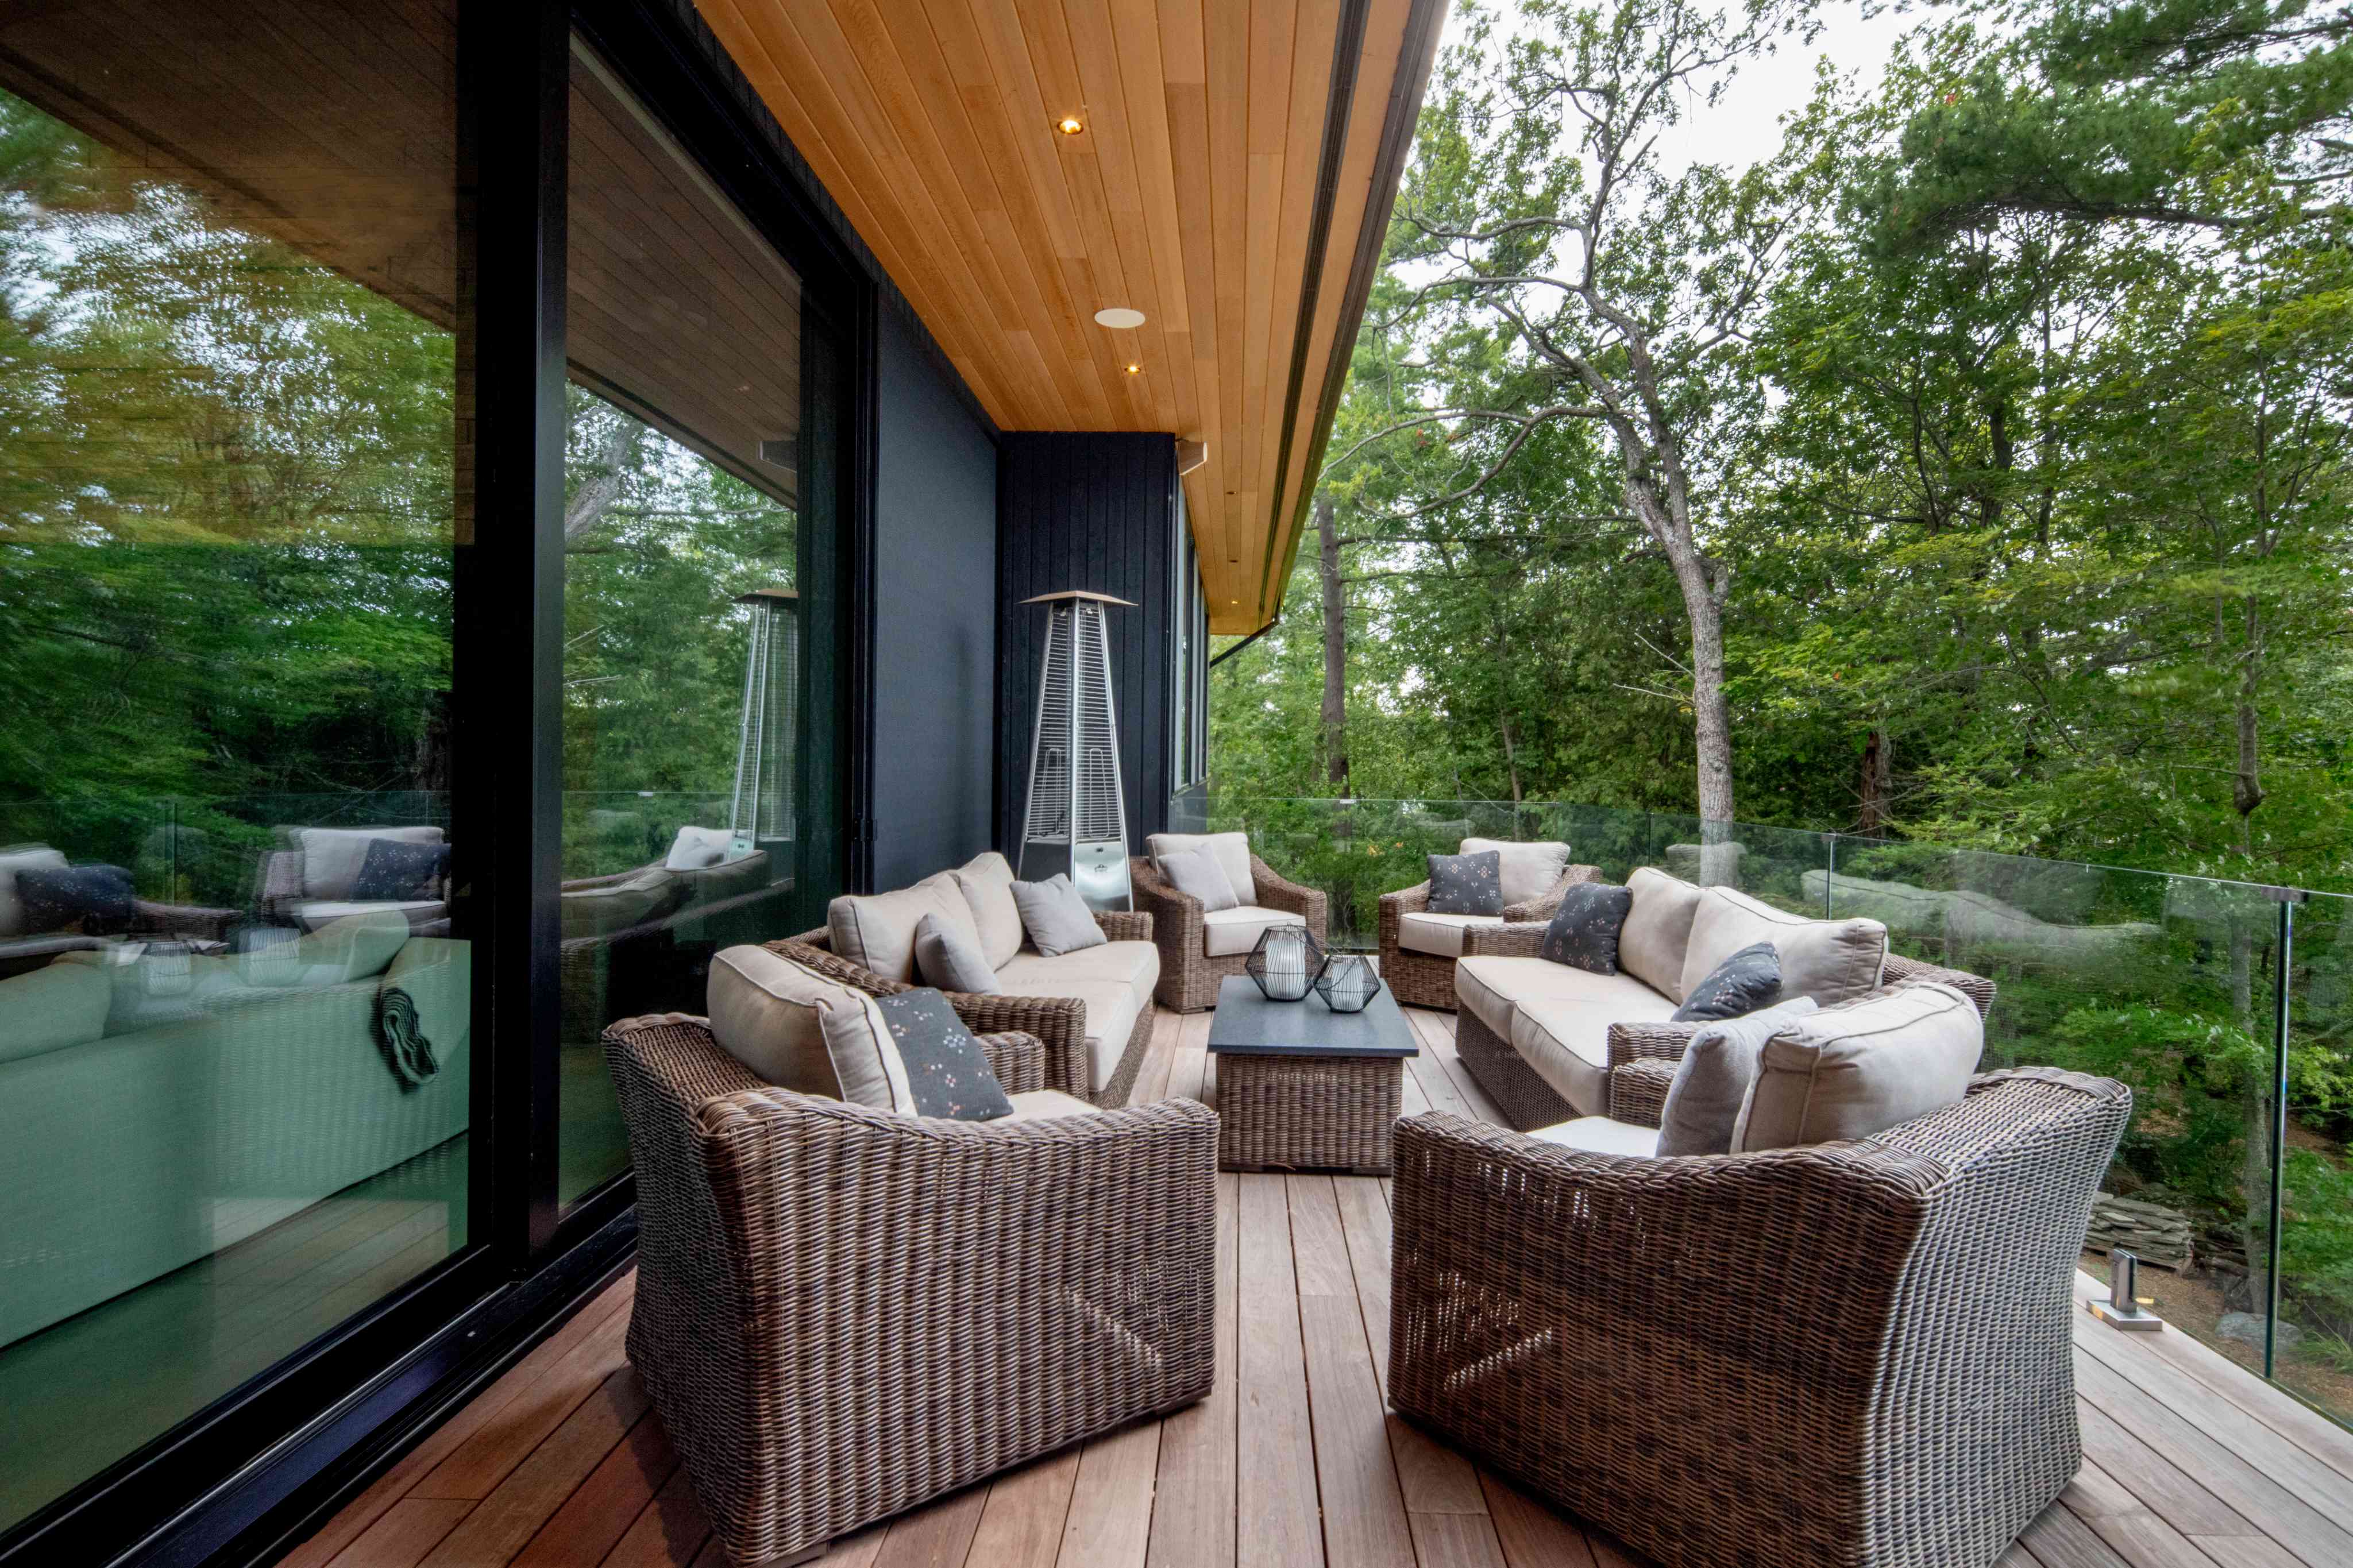 Deck view of outdoor seating area | Ballantyne Builds